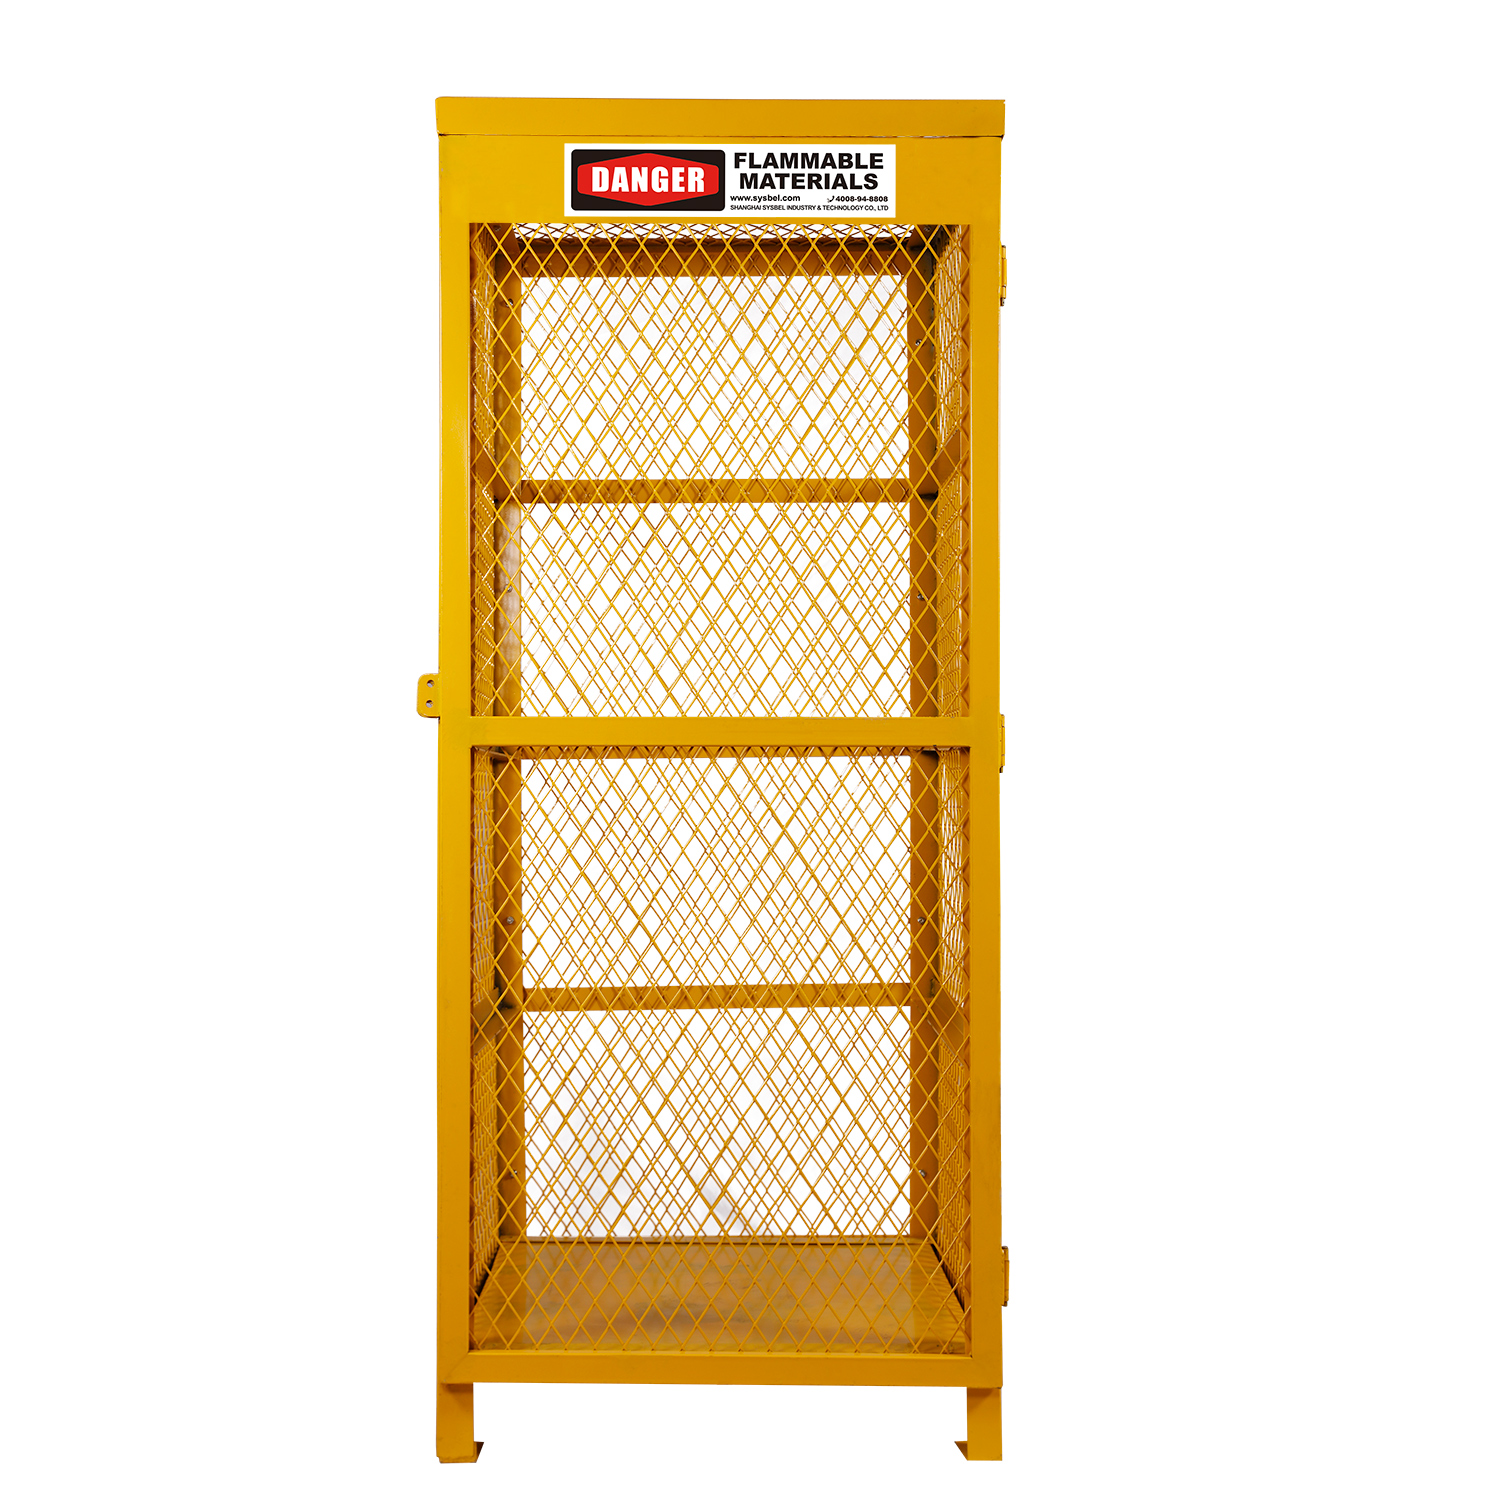 CE approved Placed Vertically 9 Compressed Gas Cylinder Safety Storage Mesh Cabinet BD